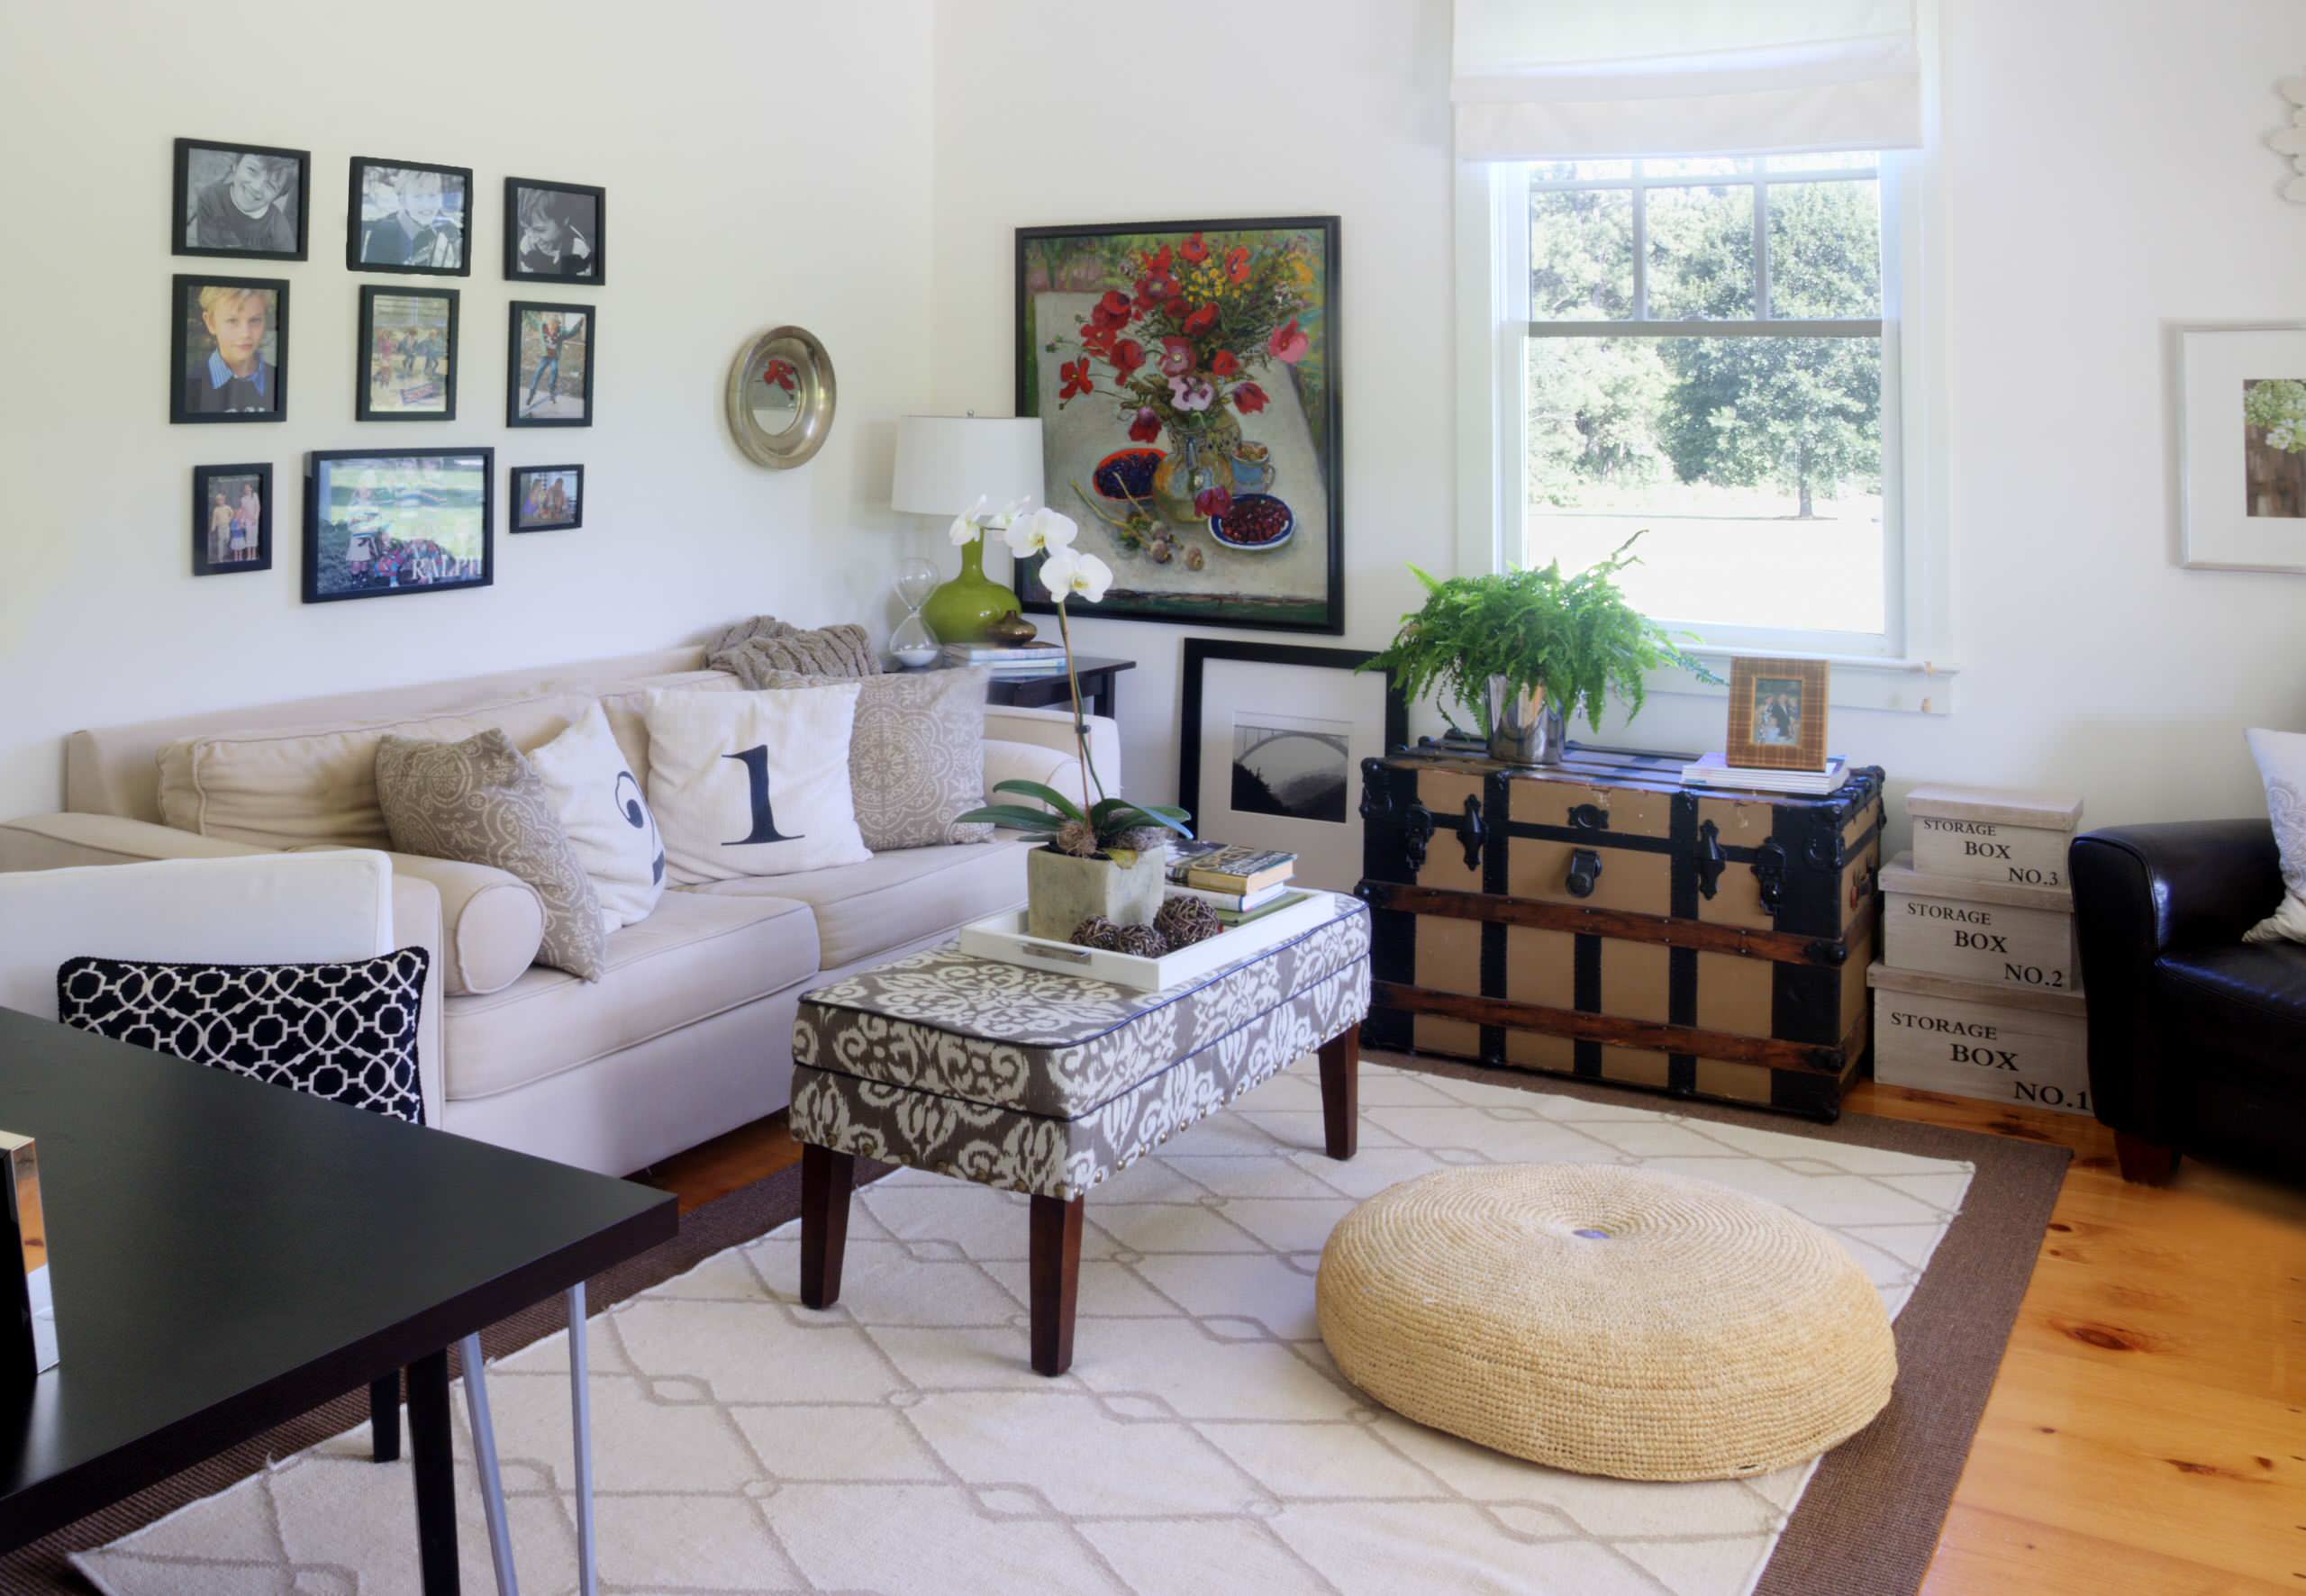 Repurposed furniture is signature feature of country chic (from Houzz)